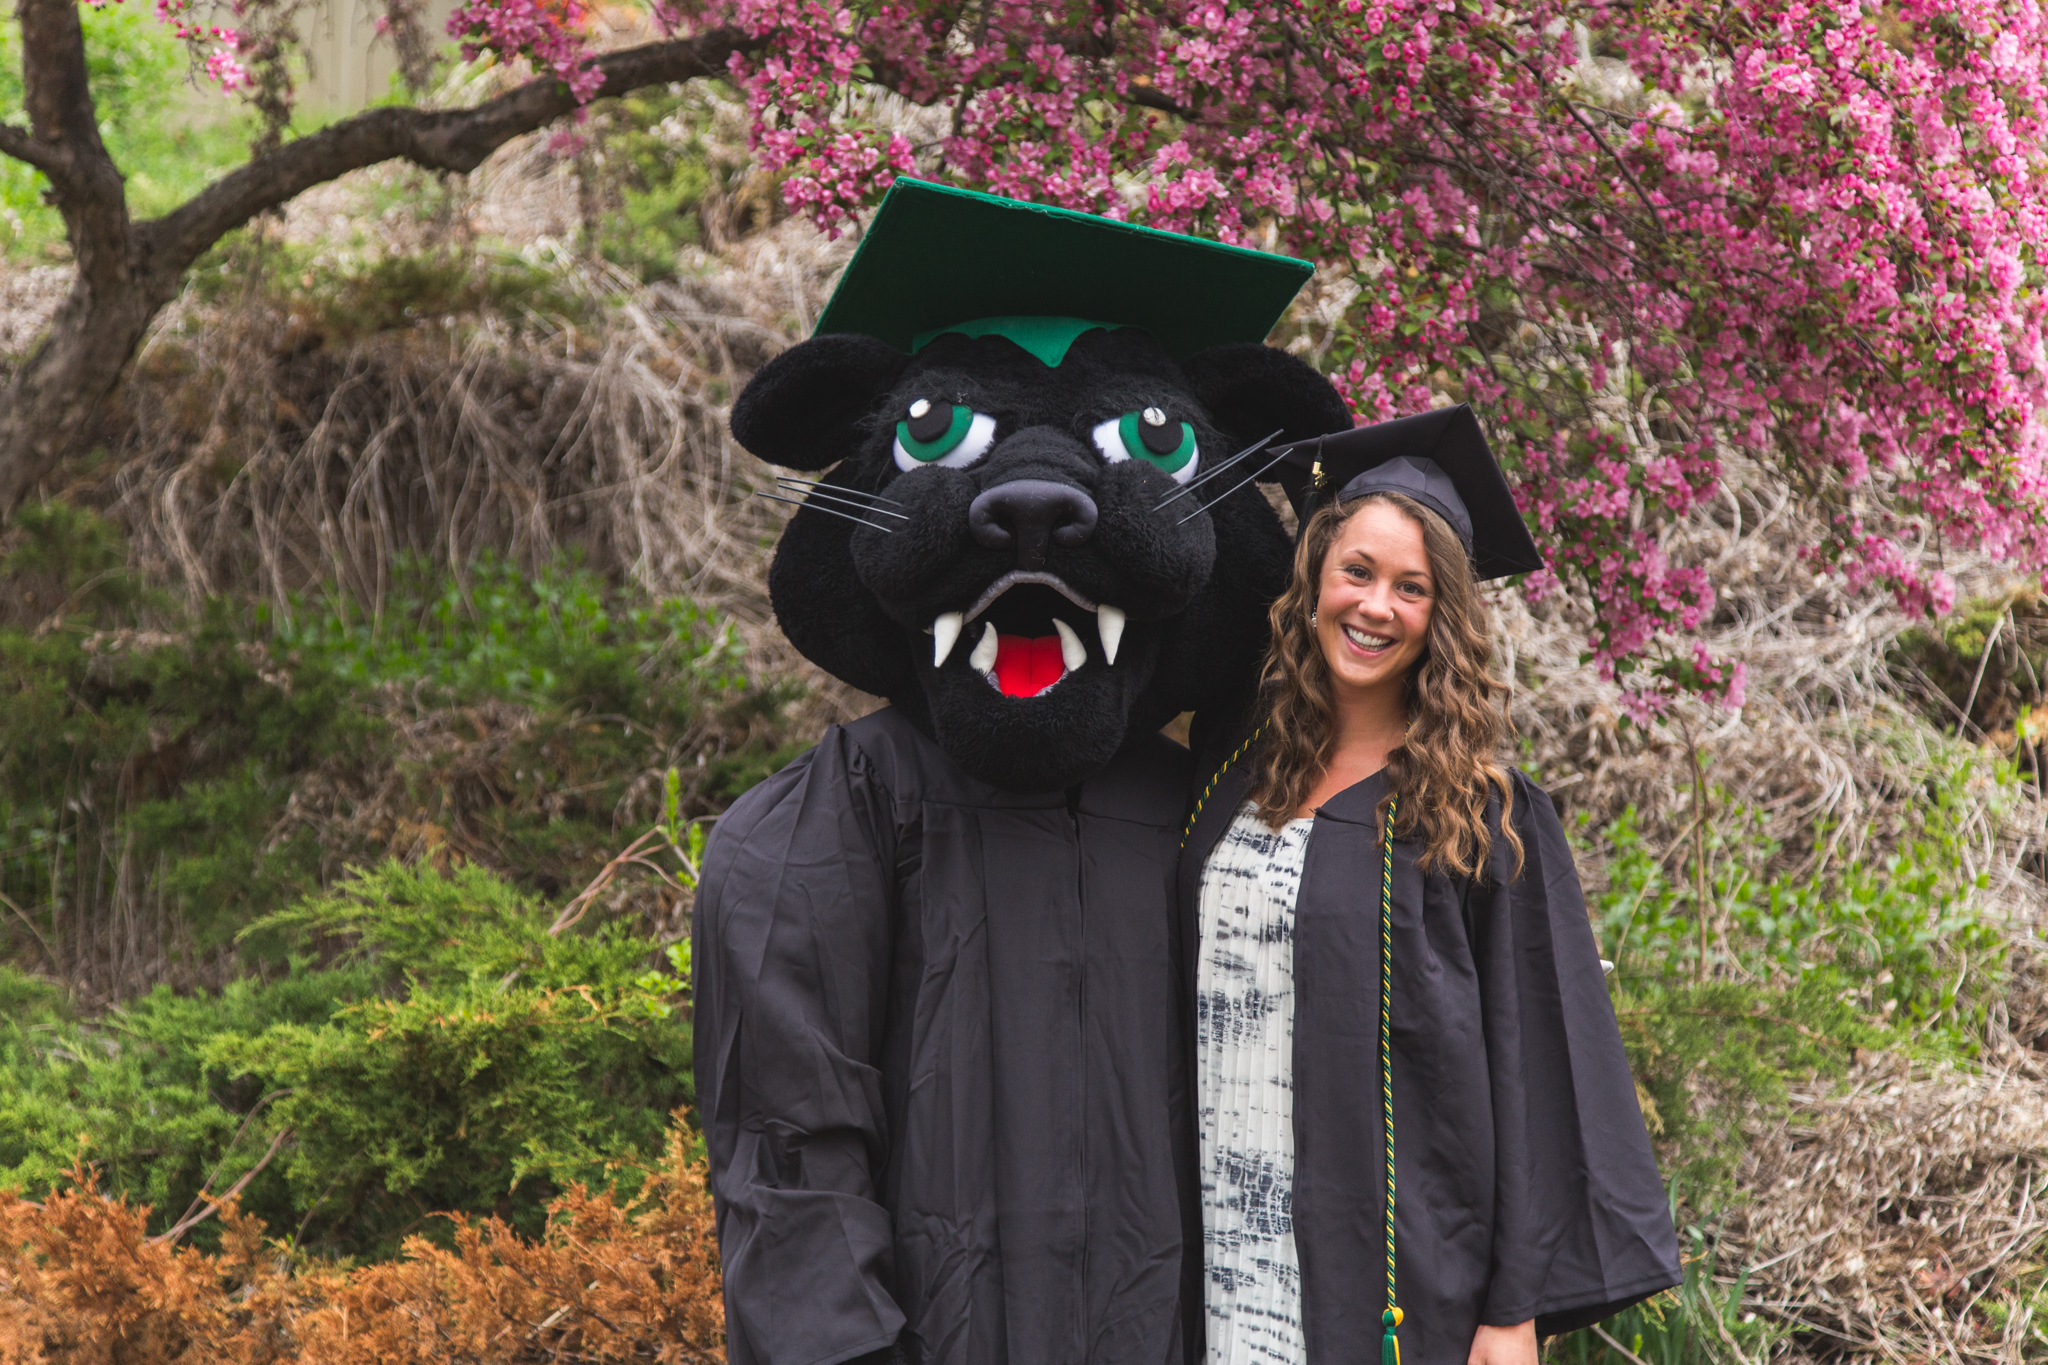 Pemi the Panther, resplendent in academic regalia, posed with graduates to celebrate their special day. Kaleb Hart ’11 photo.